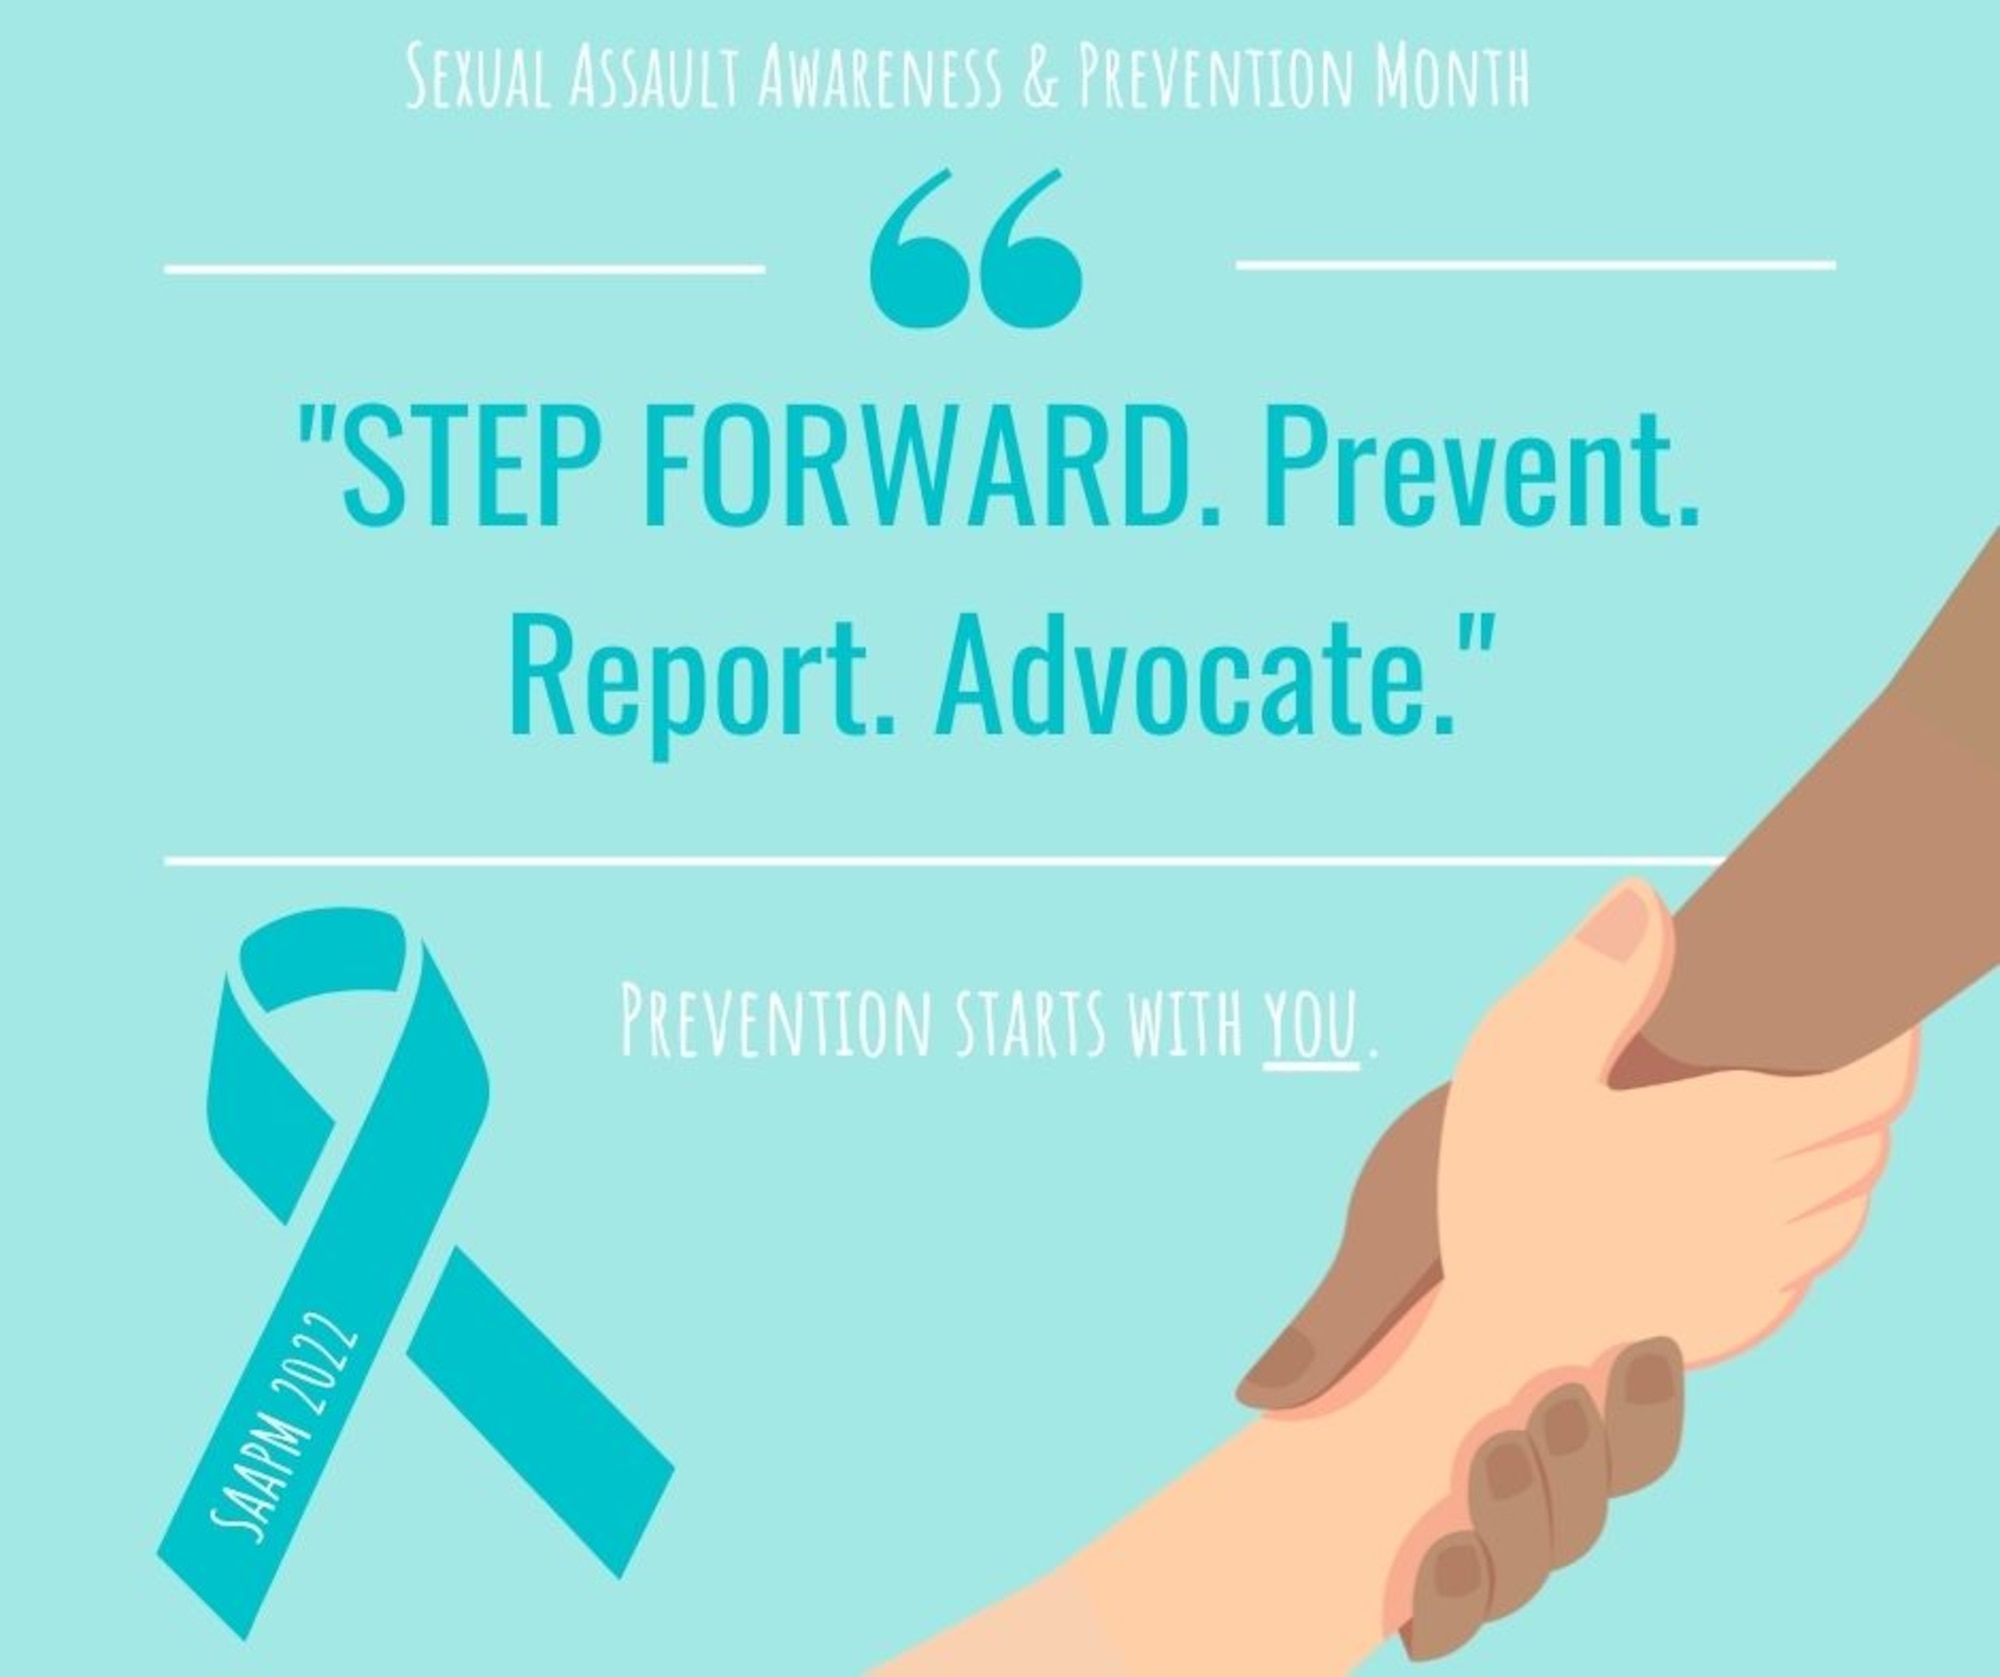 Every year, April is recognized as Sexual Assault Awareness and Prevention Month (SAAPM) by both military and civilian communities.